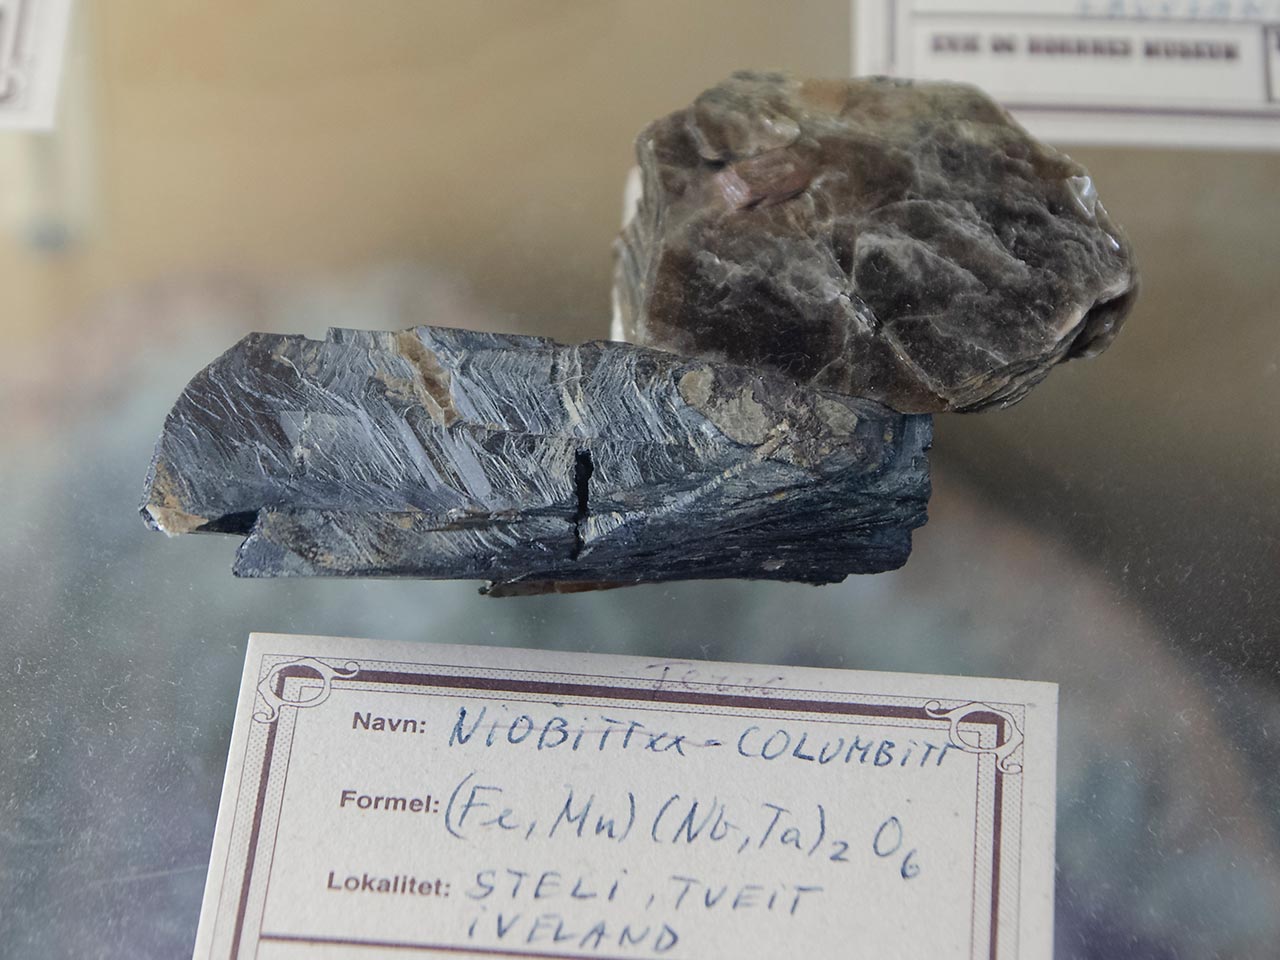 Columbite crystal with mica from Tveit, Iveland, Norway